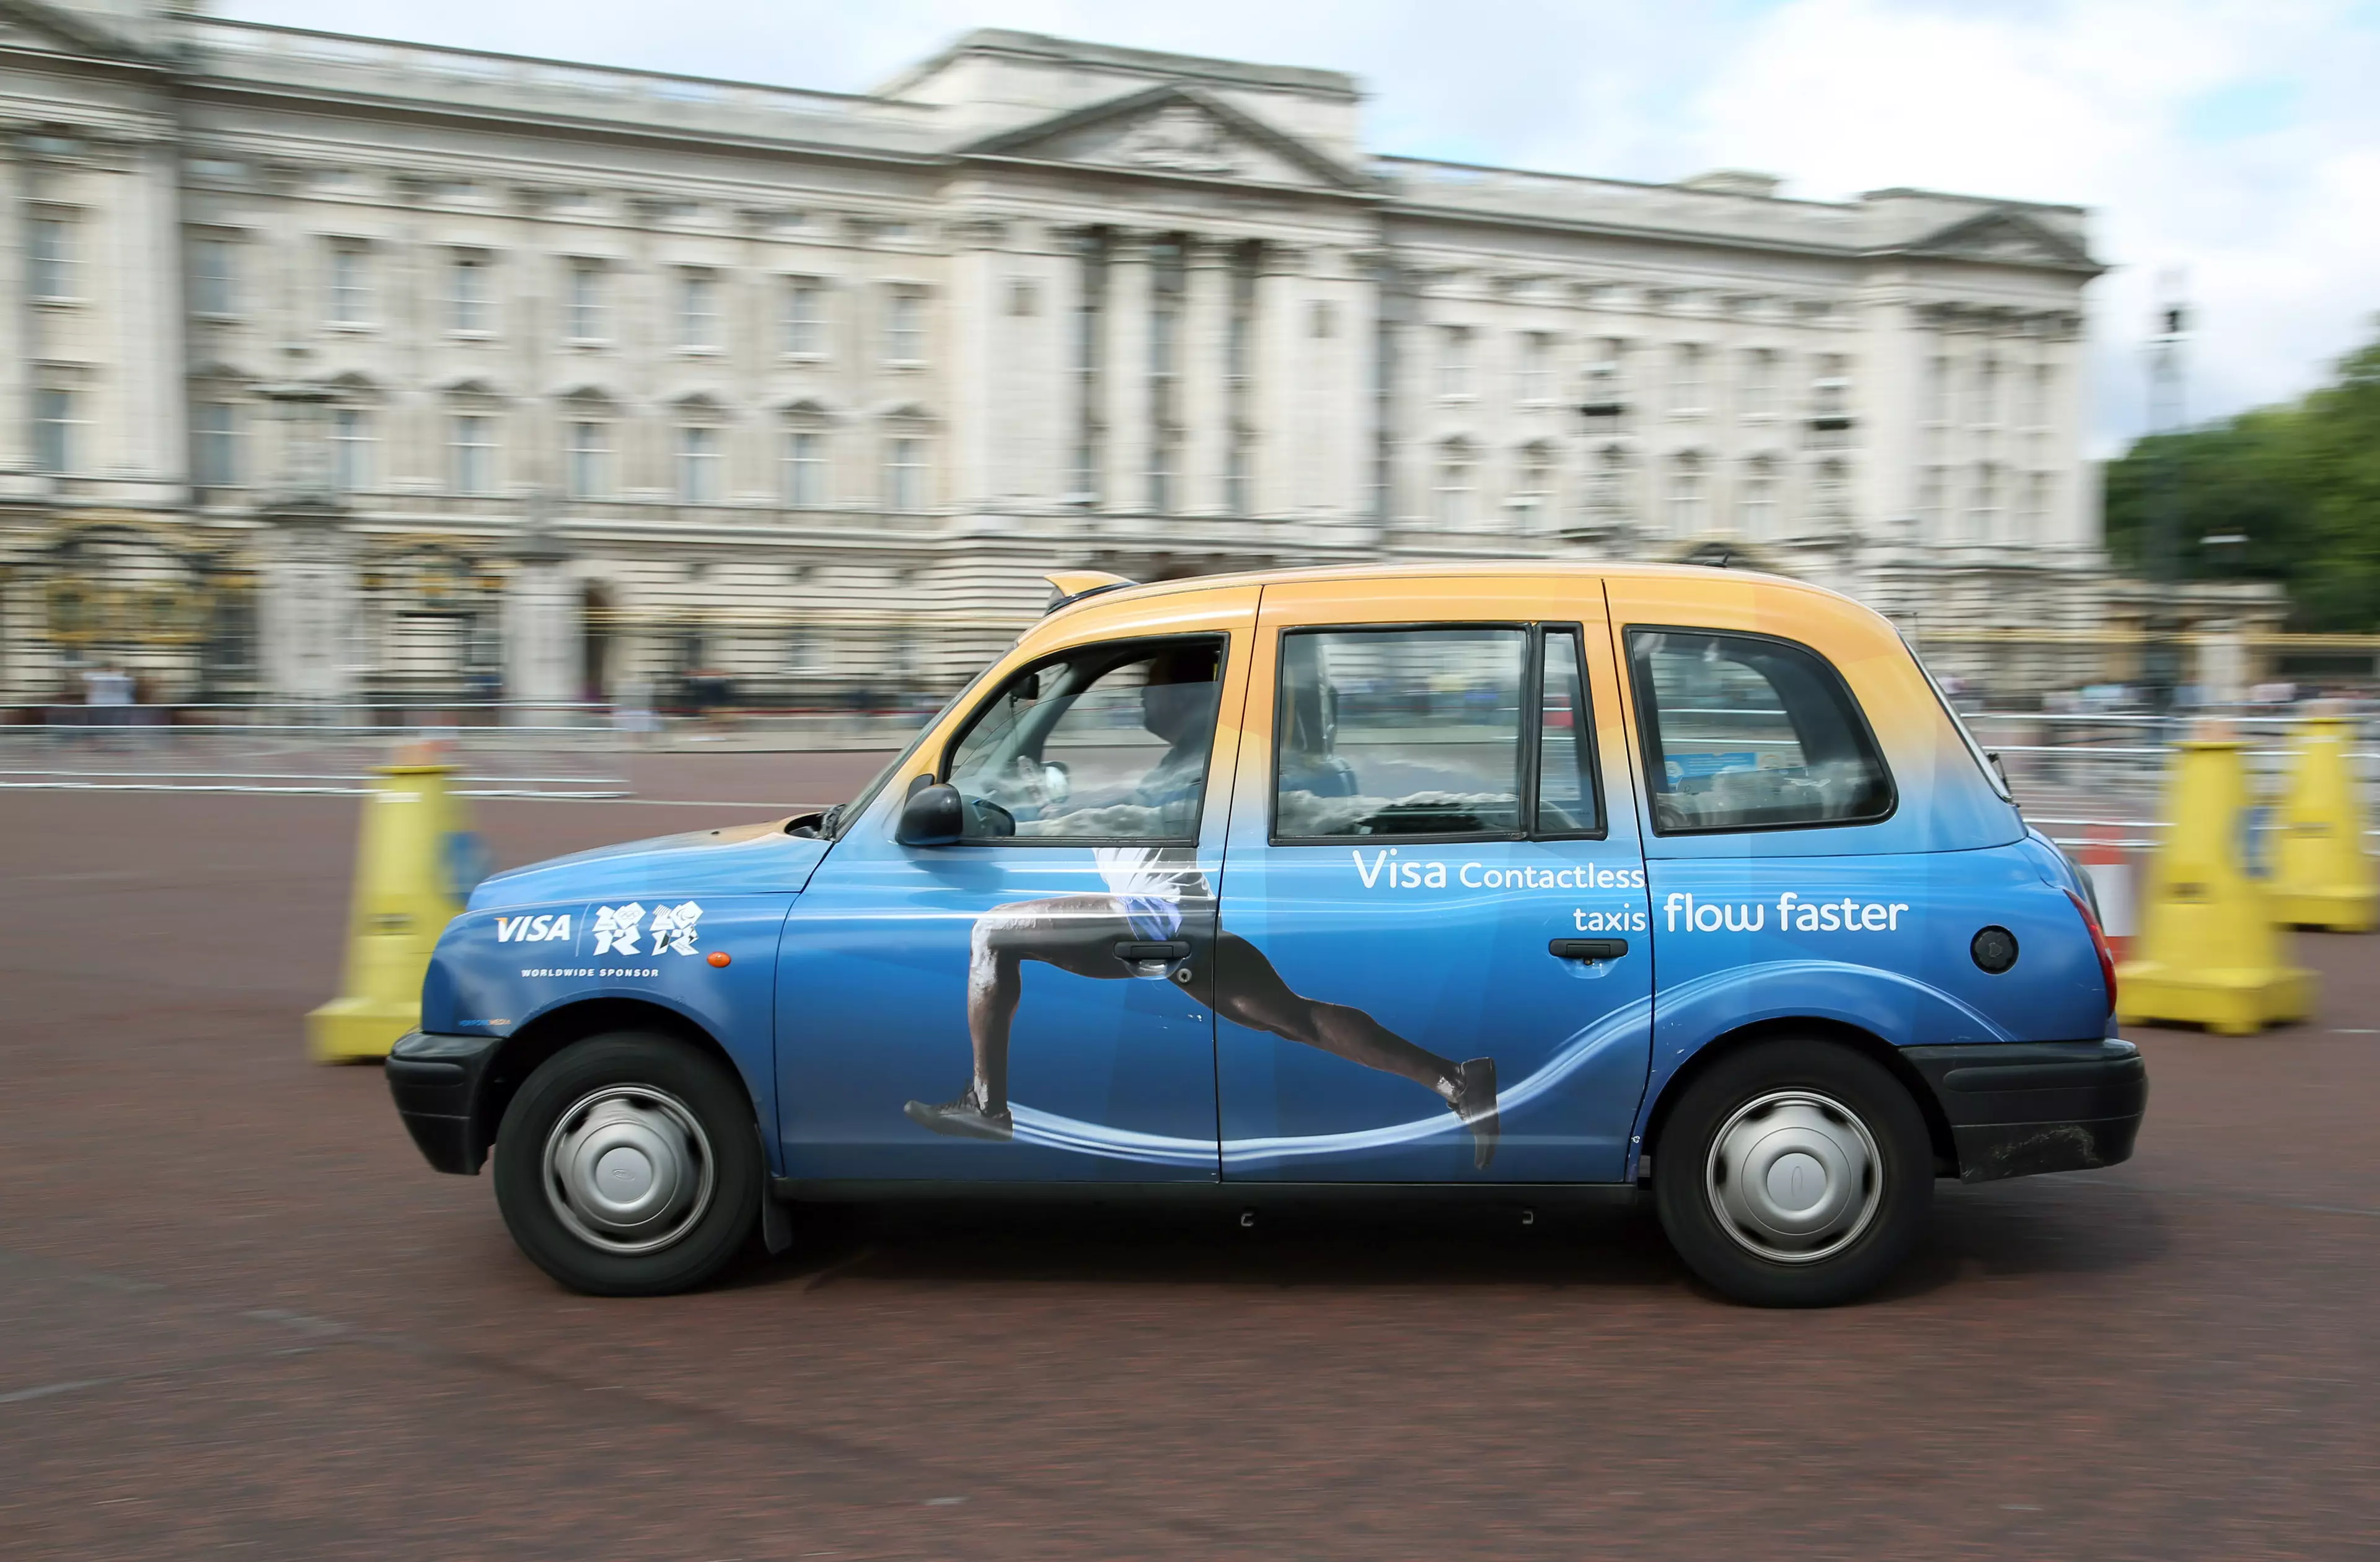 You Can Now Go Speed Dating In A Taxi Around London.